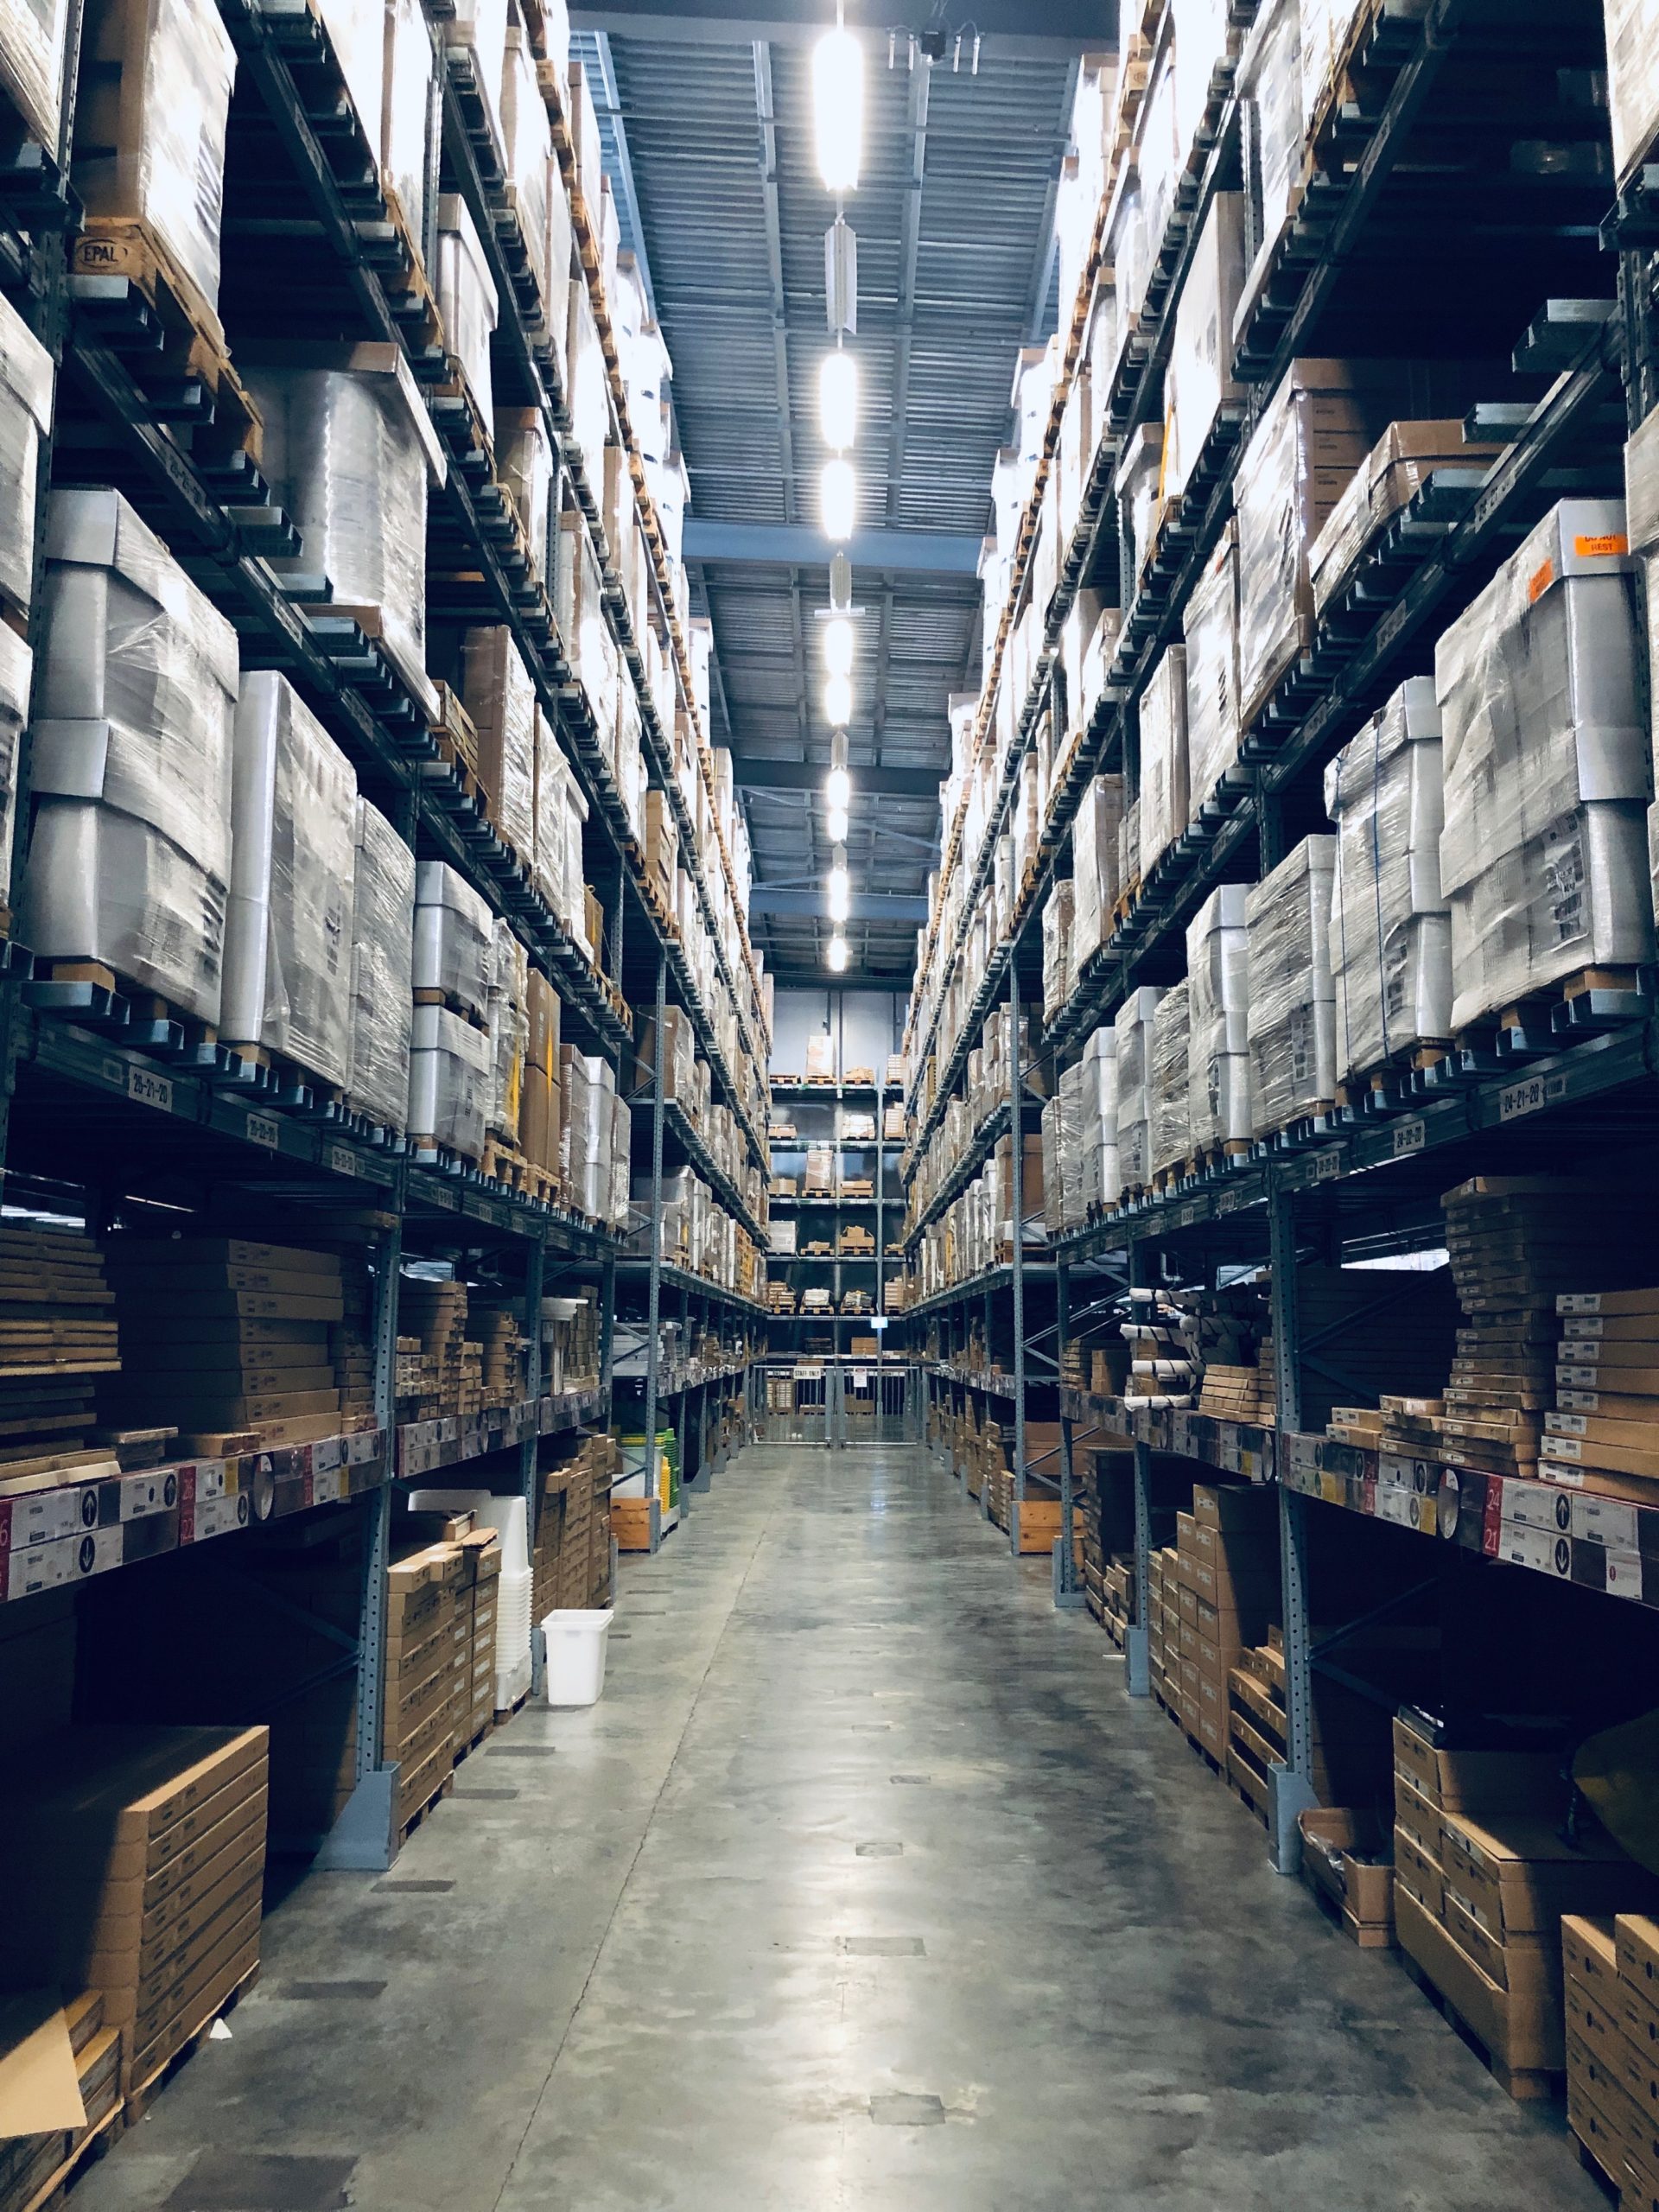 A warehouse filled with boxes and pallets offers supplier incentives.